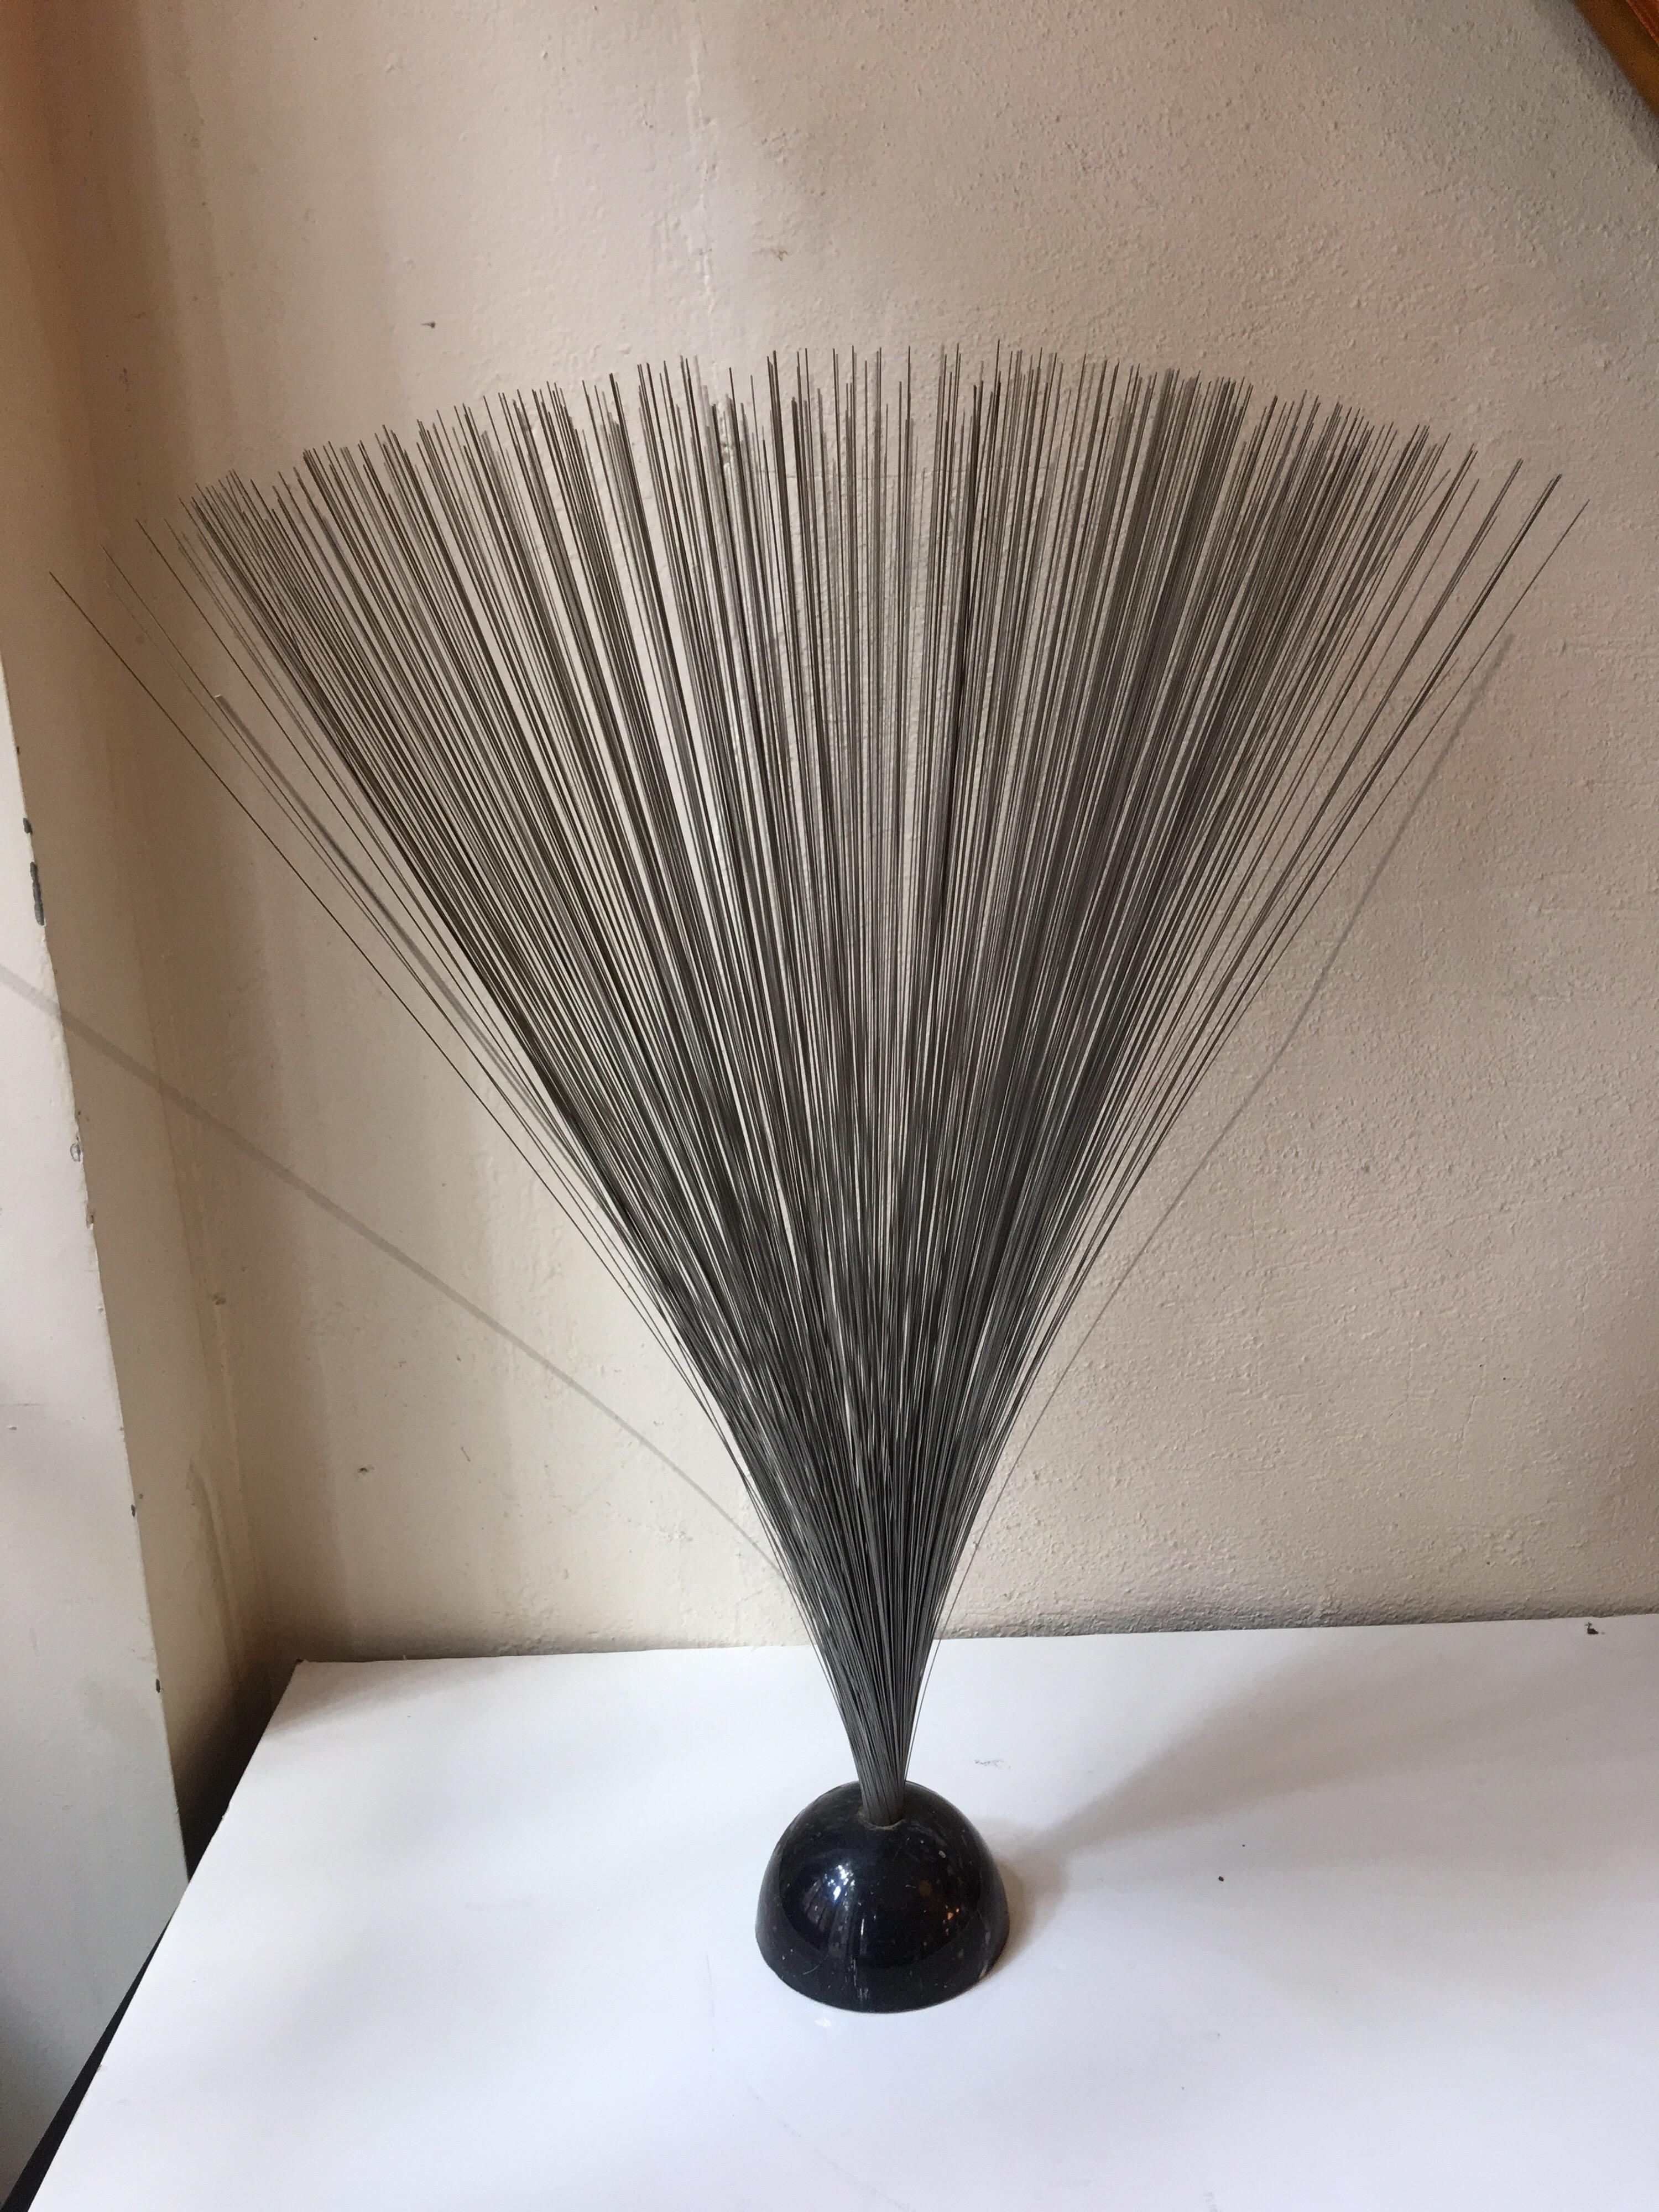 Nice Bertoia style sculpture with a 1/2 dome marble base. Probably from the early 1970s.